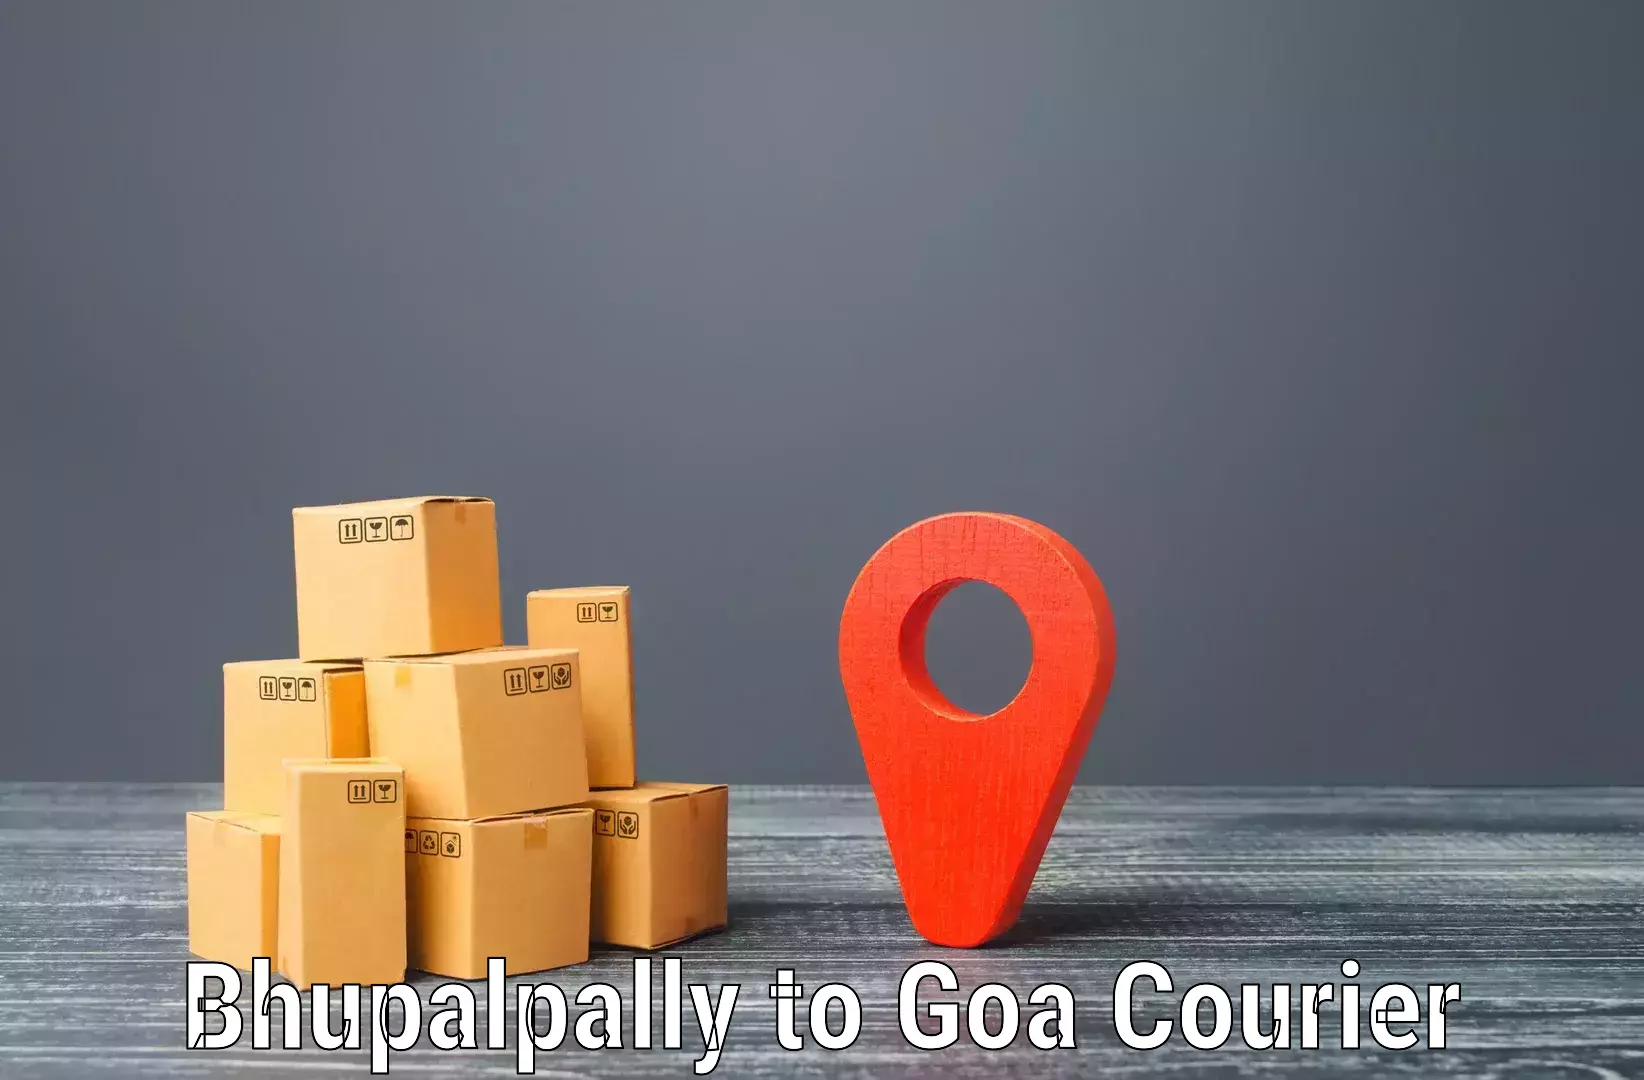 Express delivery network Bhupalpally to IIT Goa